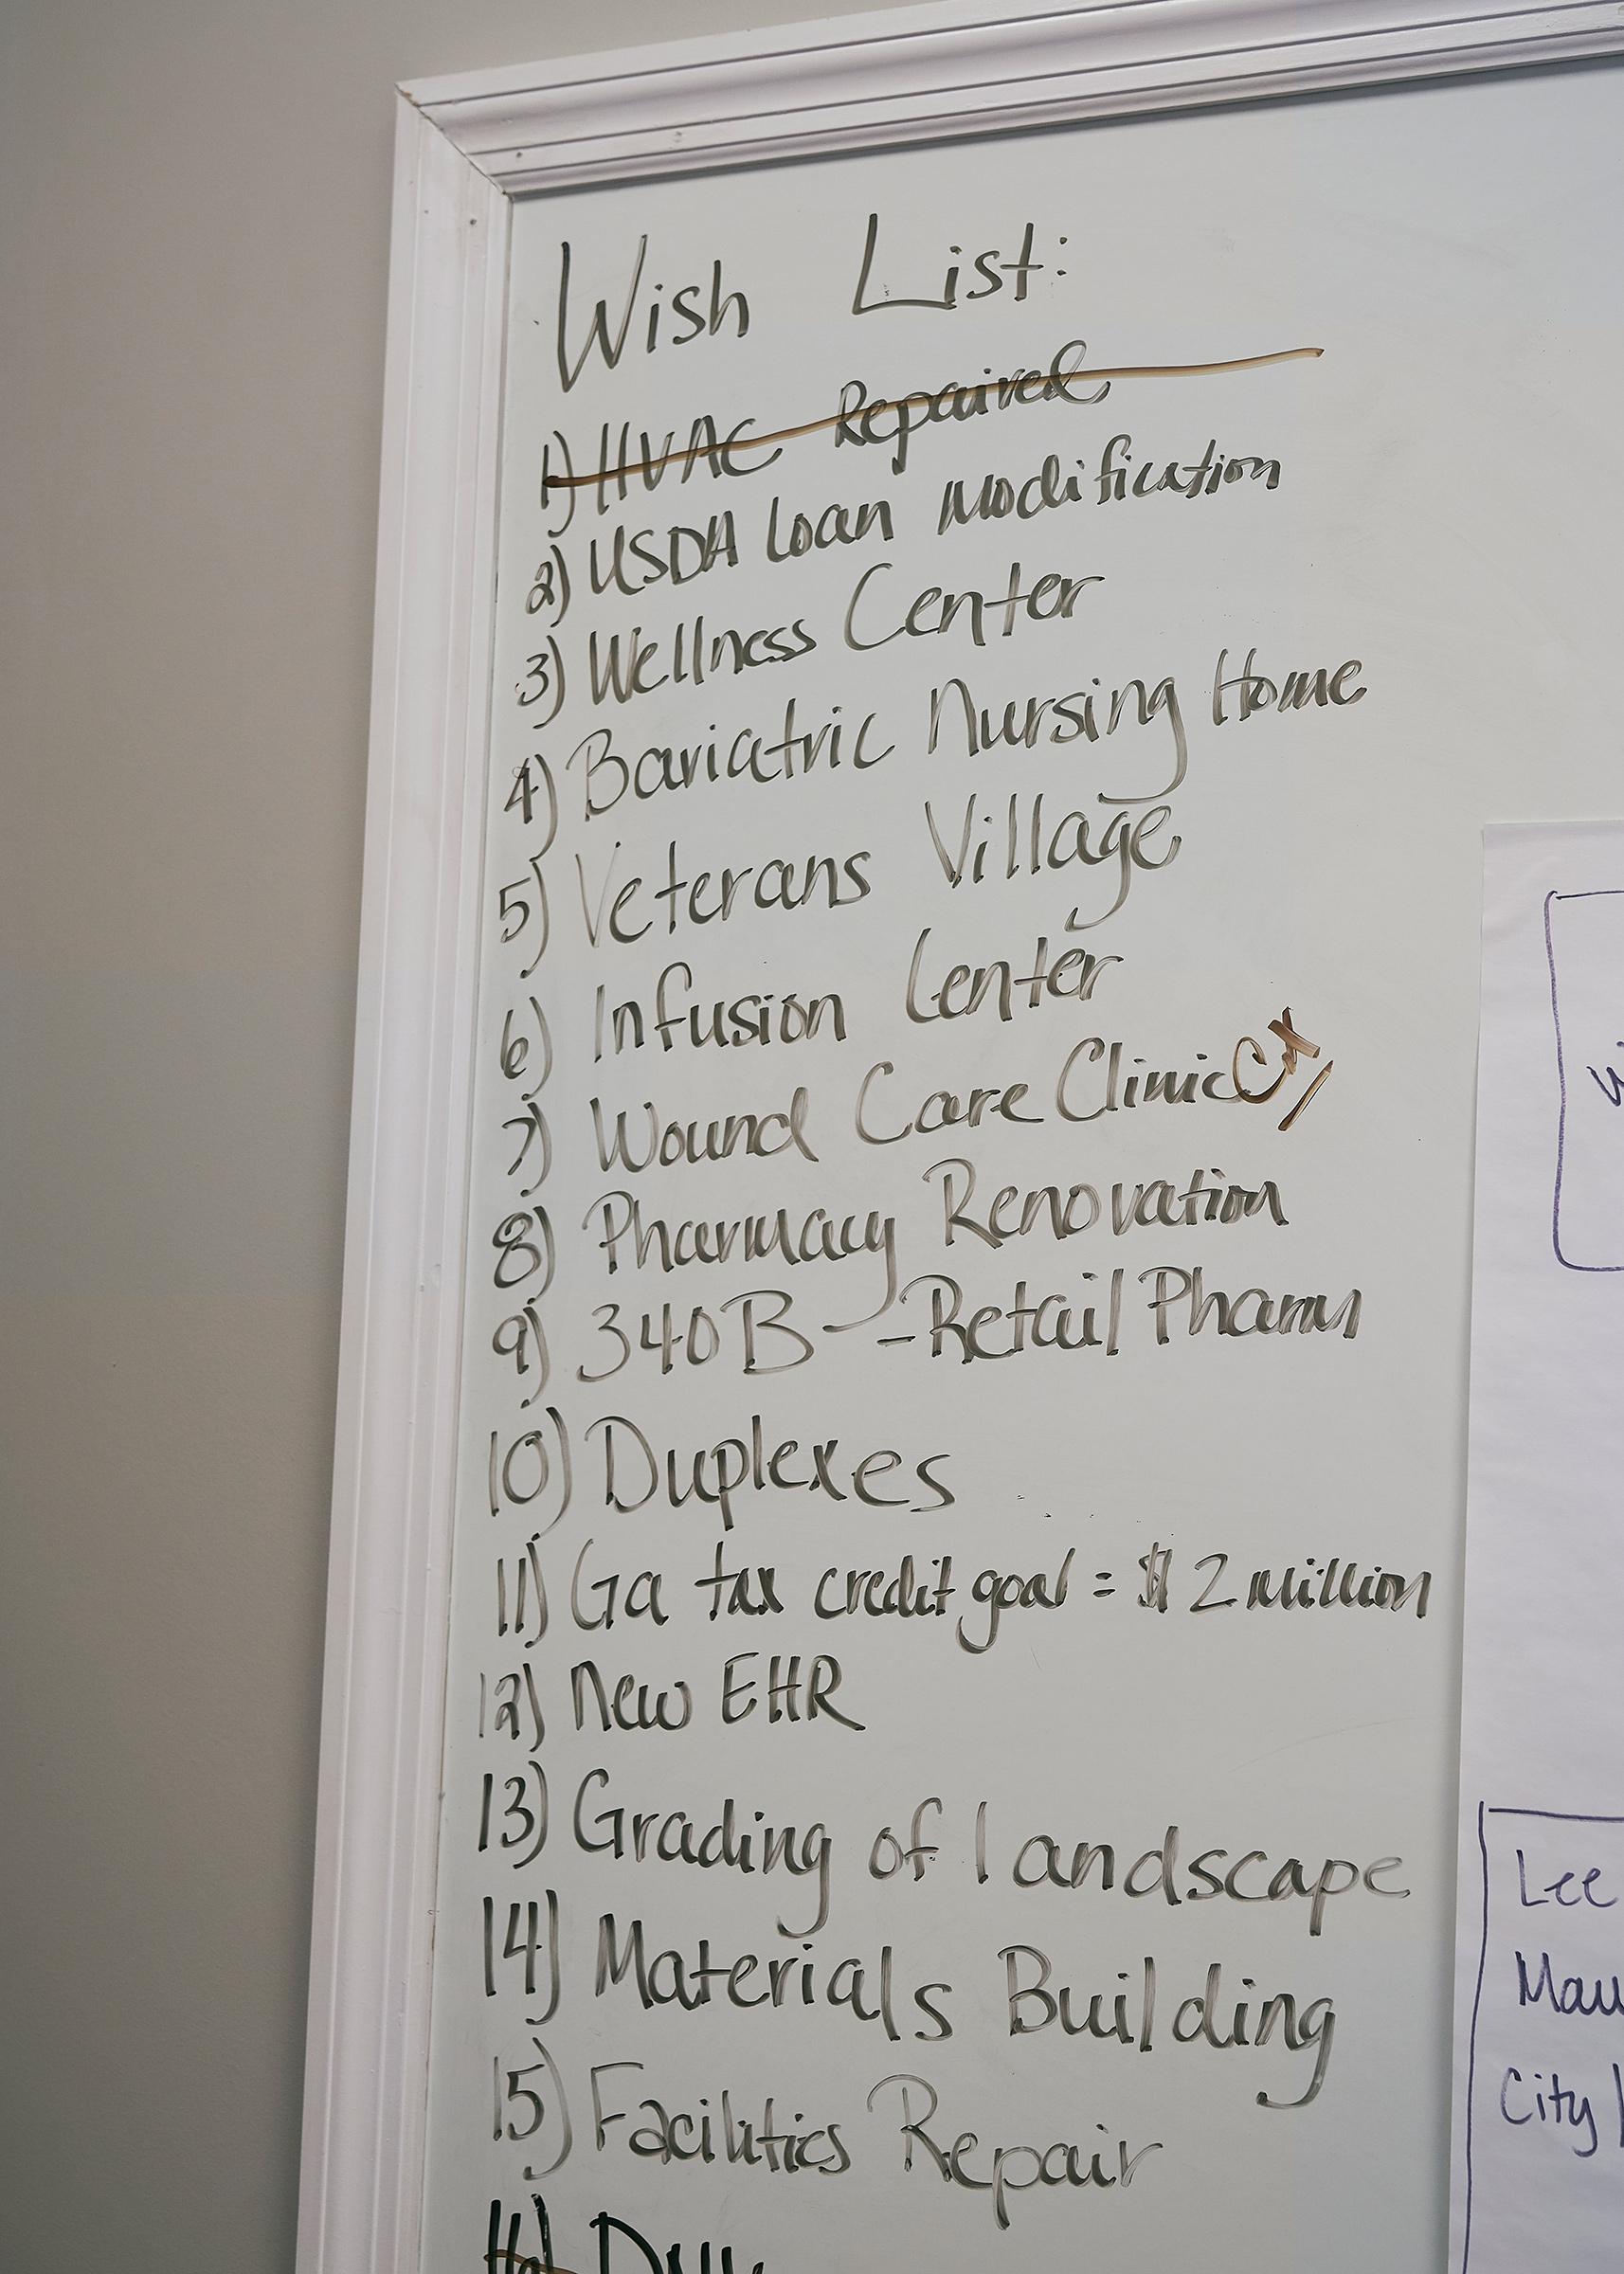 A wishlist in the office of Angela Ammons, CEO of Clinch Memorial Hospital.